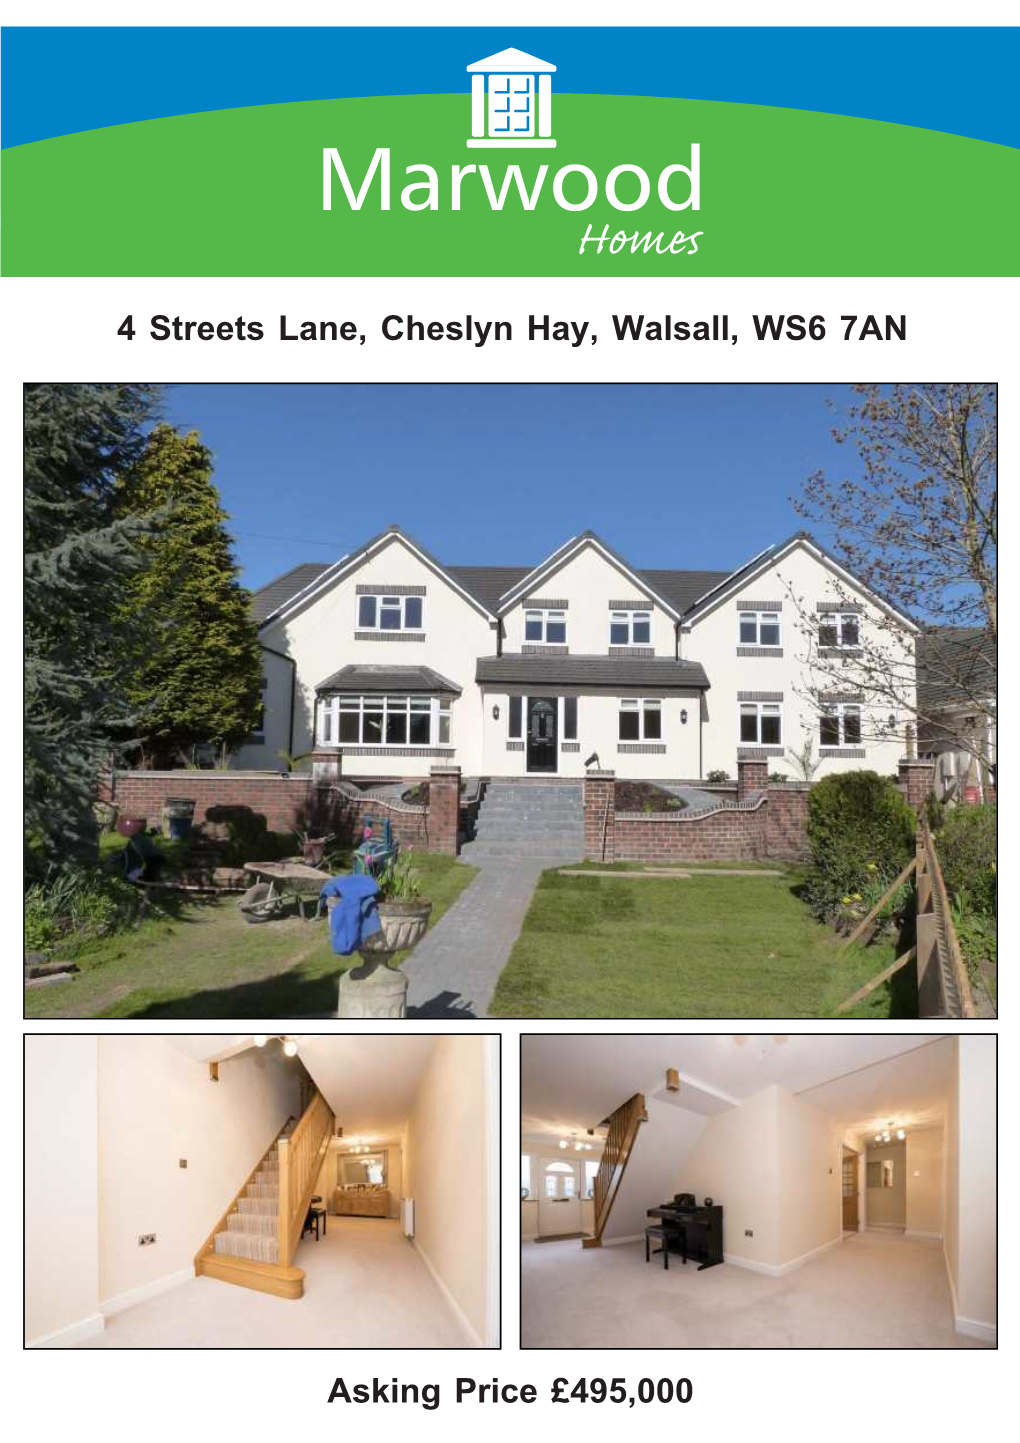 4 Streets Lane, Cheslyn Hay, Walsall, WS6 7AN Asking Price £495,000